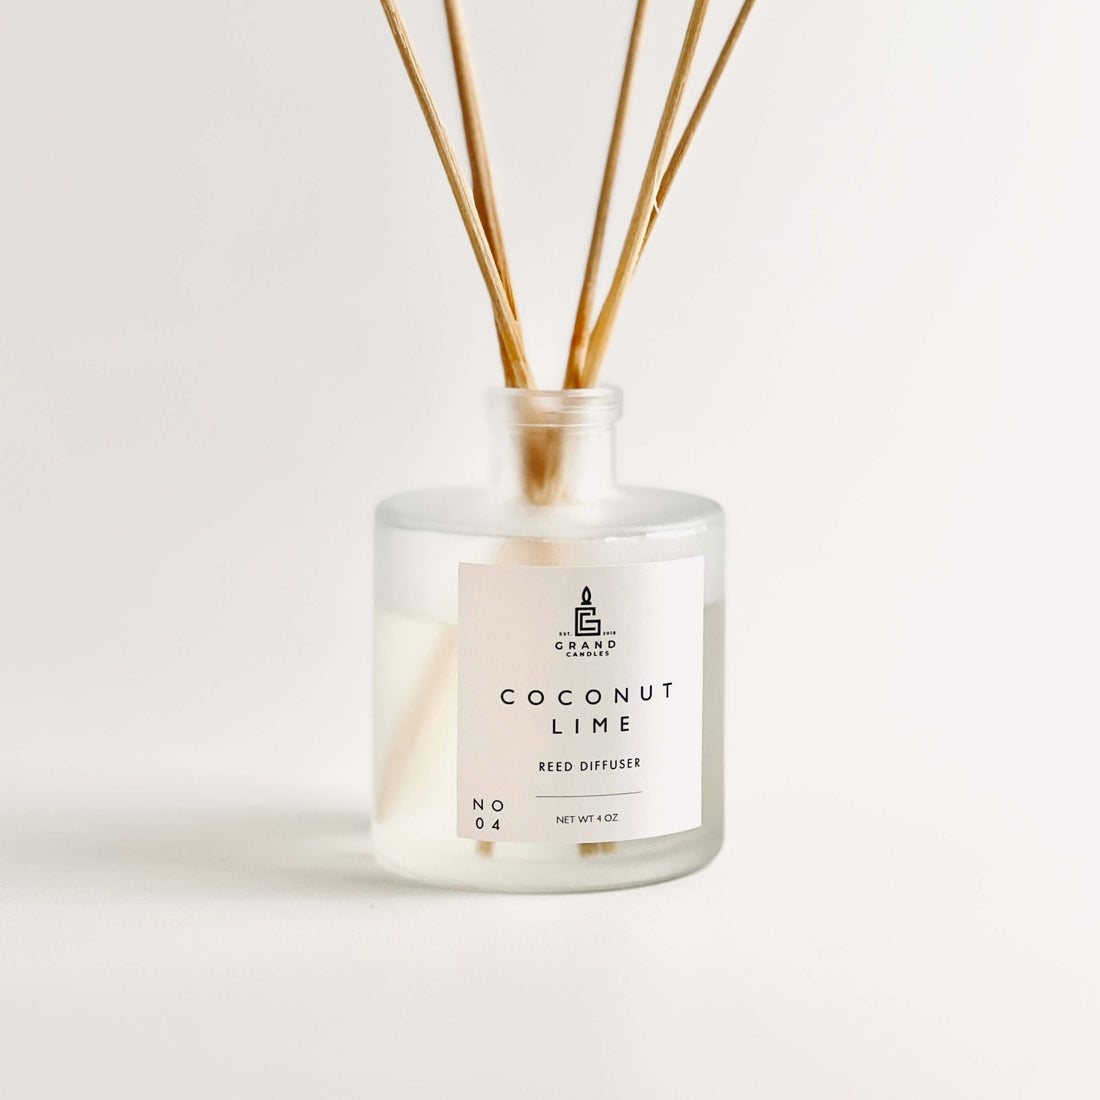 Coconut Lime Reed Diffuser